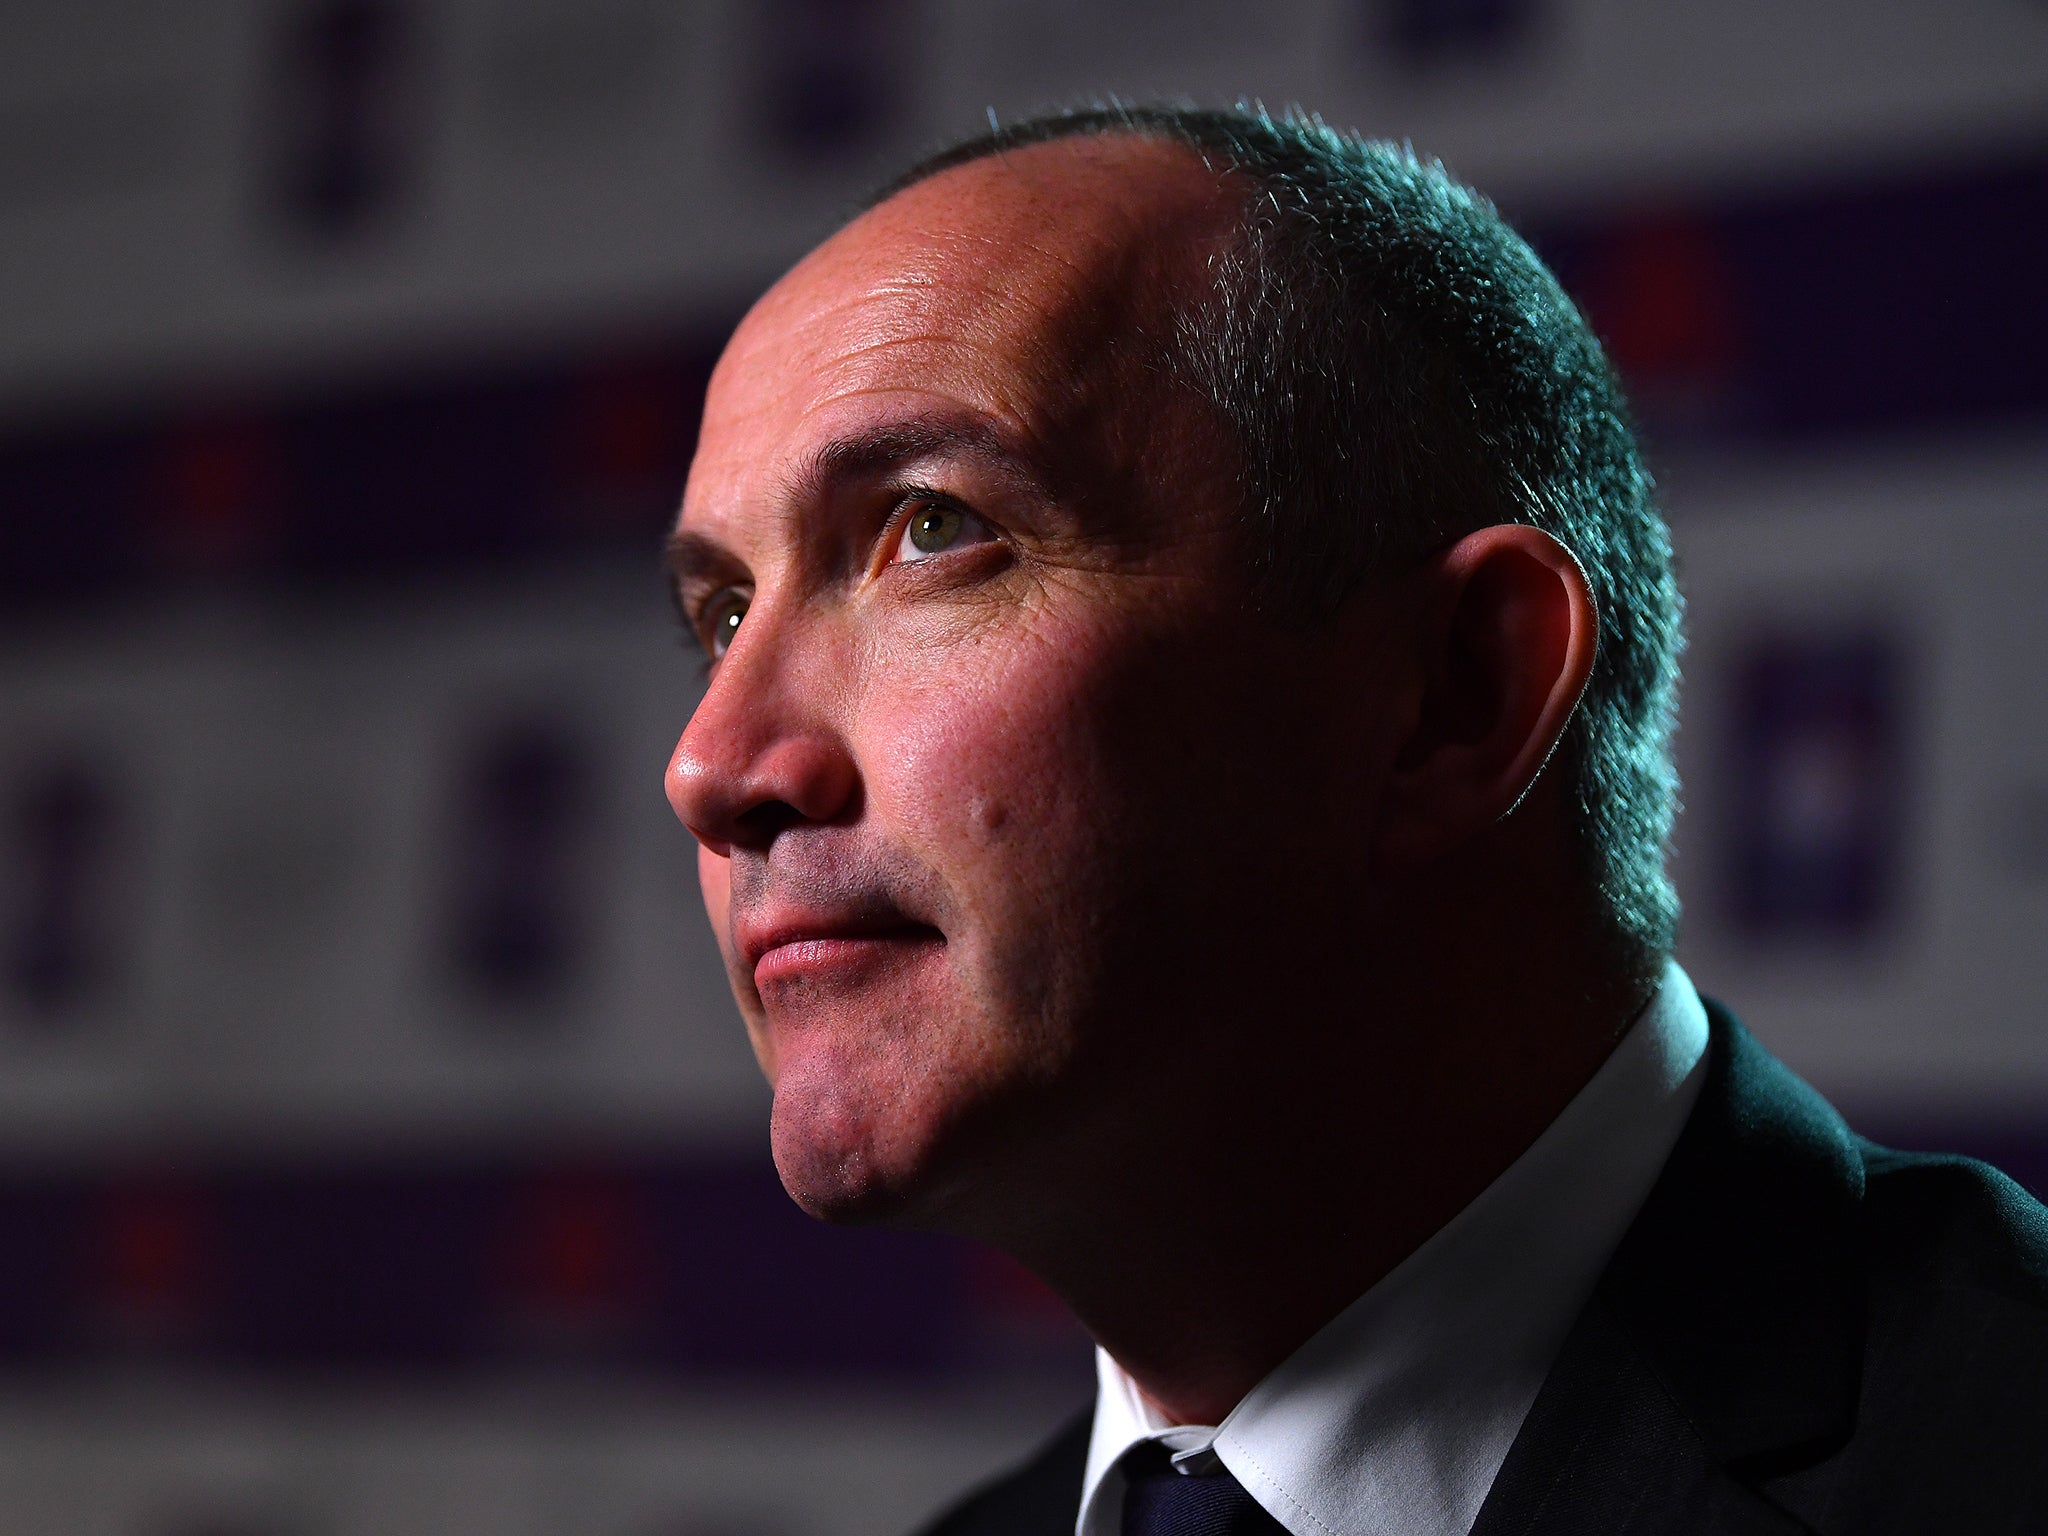 Conor O'Shea feels there was an 'overreaction' to his tactics following the defeat by England in the Six Nations